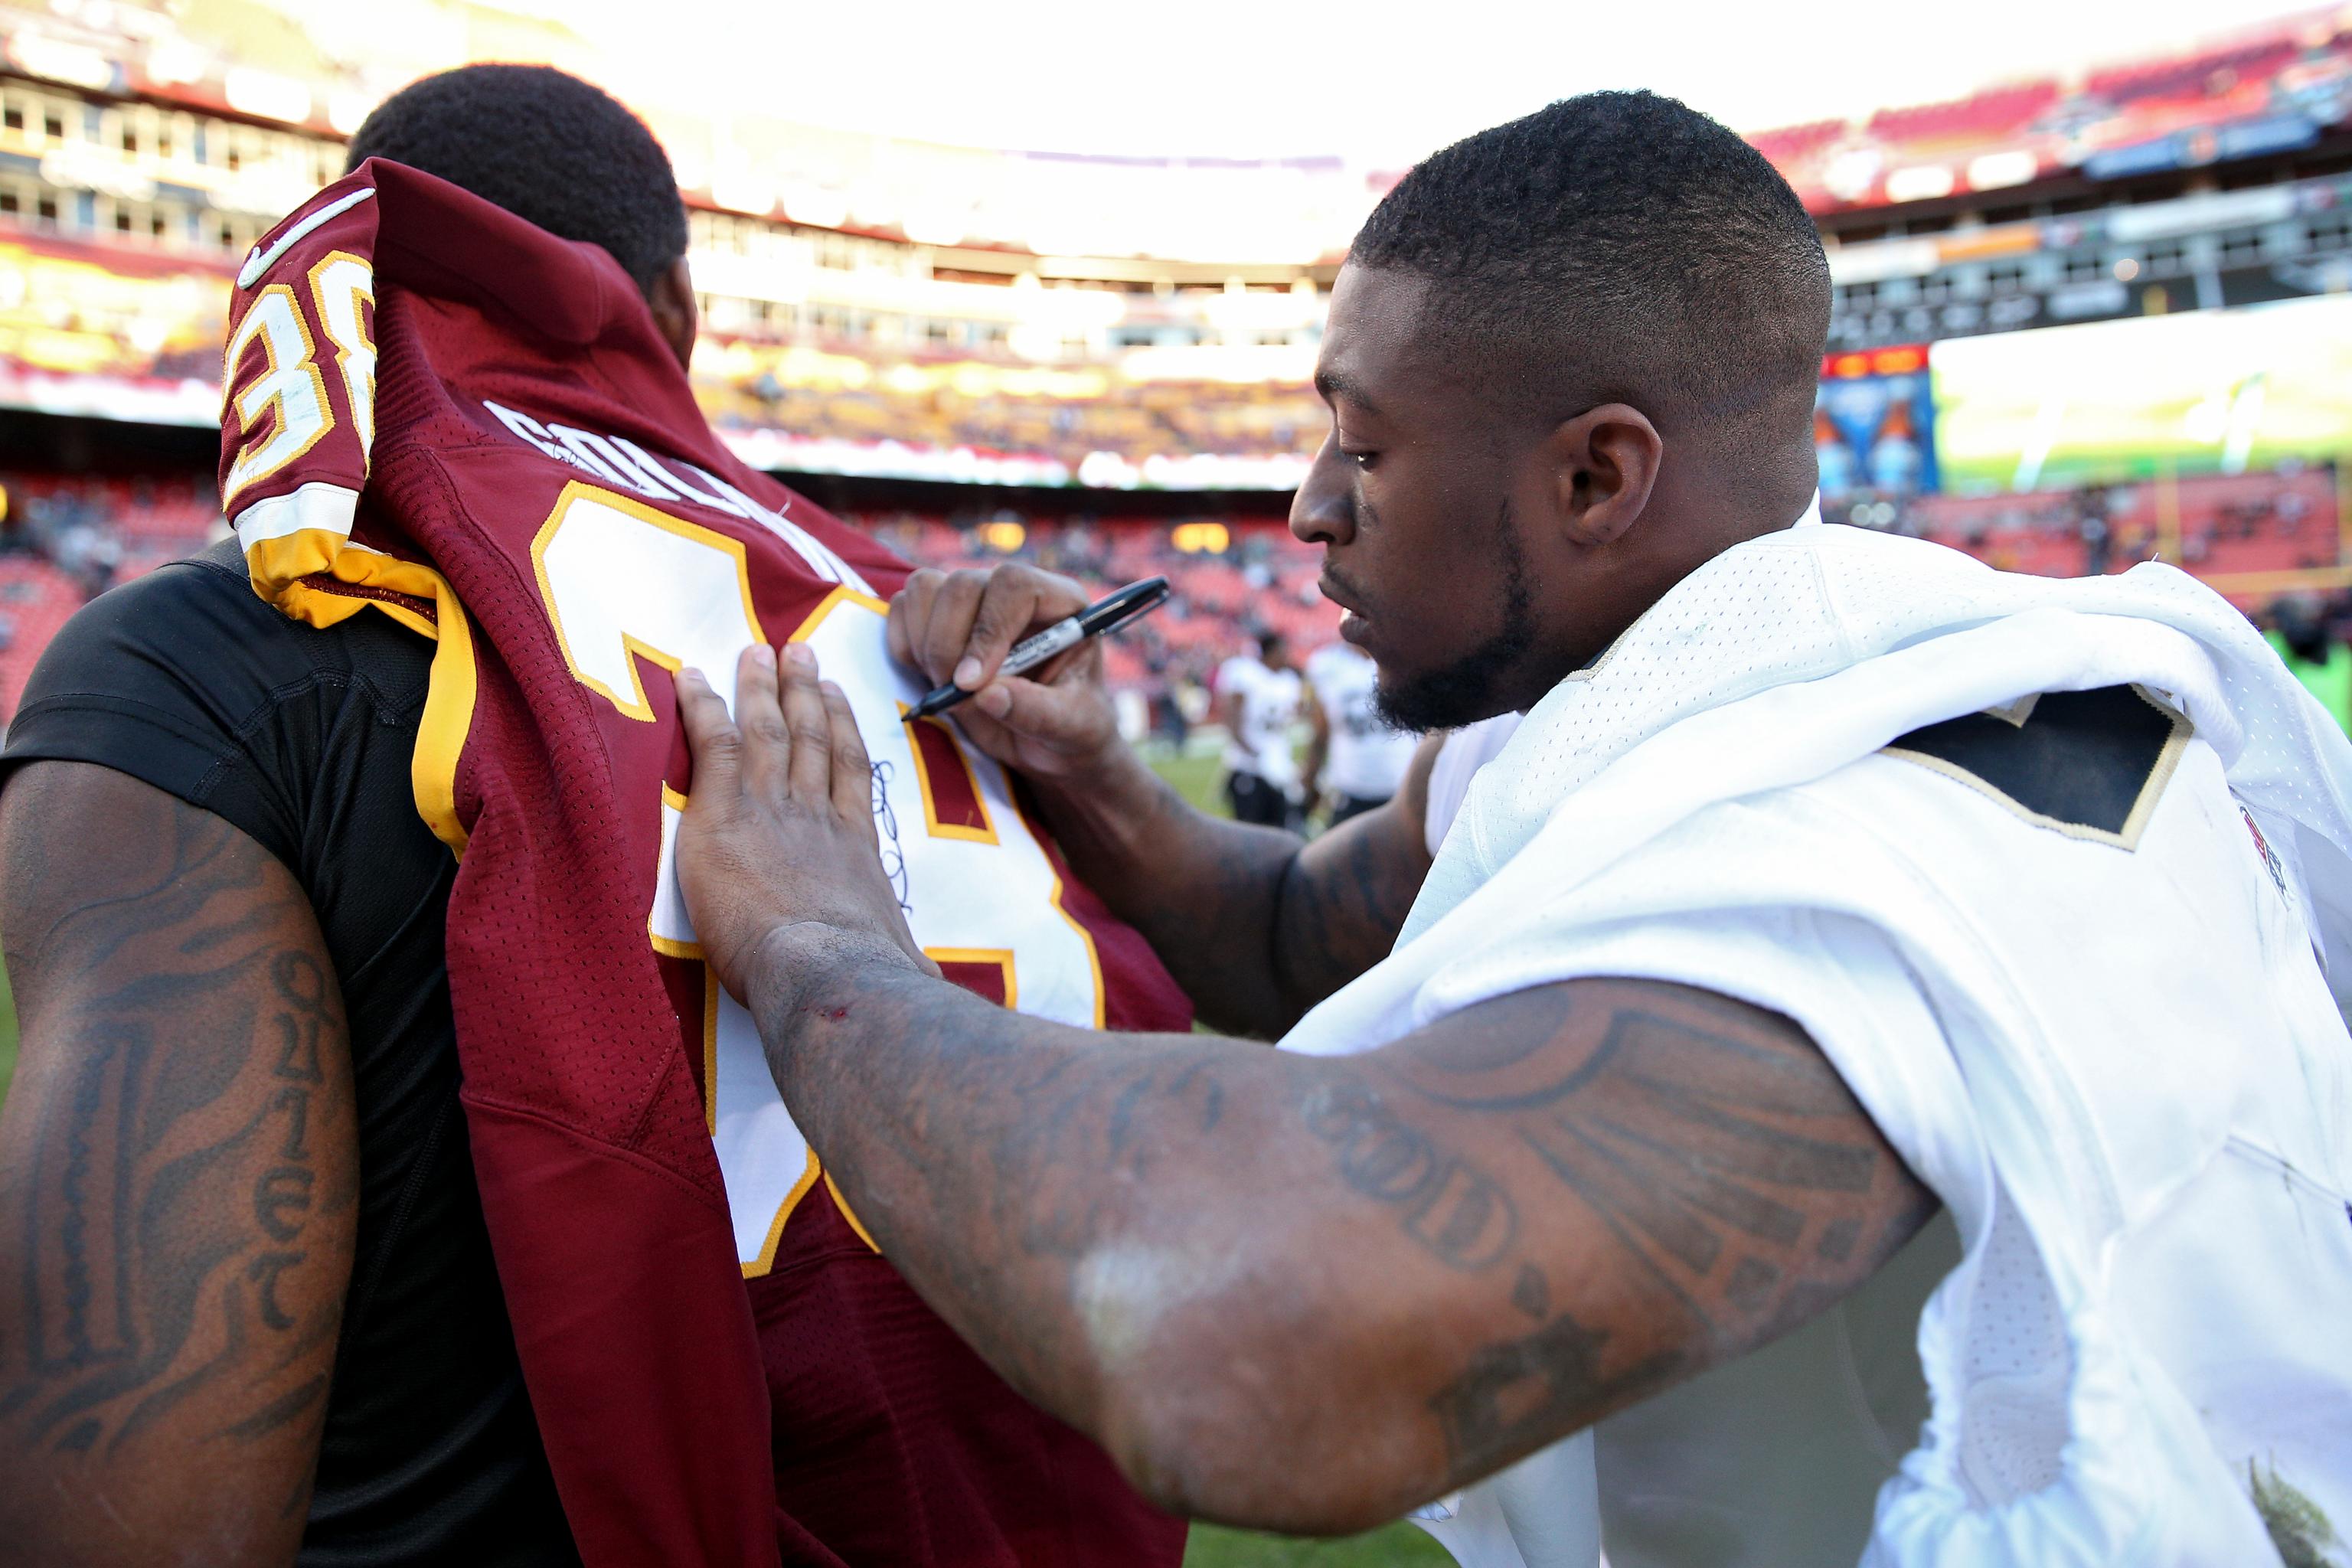 Nike omitted Washington Redskins team name from NFL 'Salute to